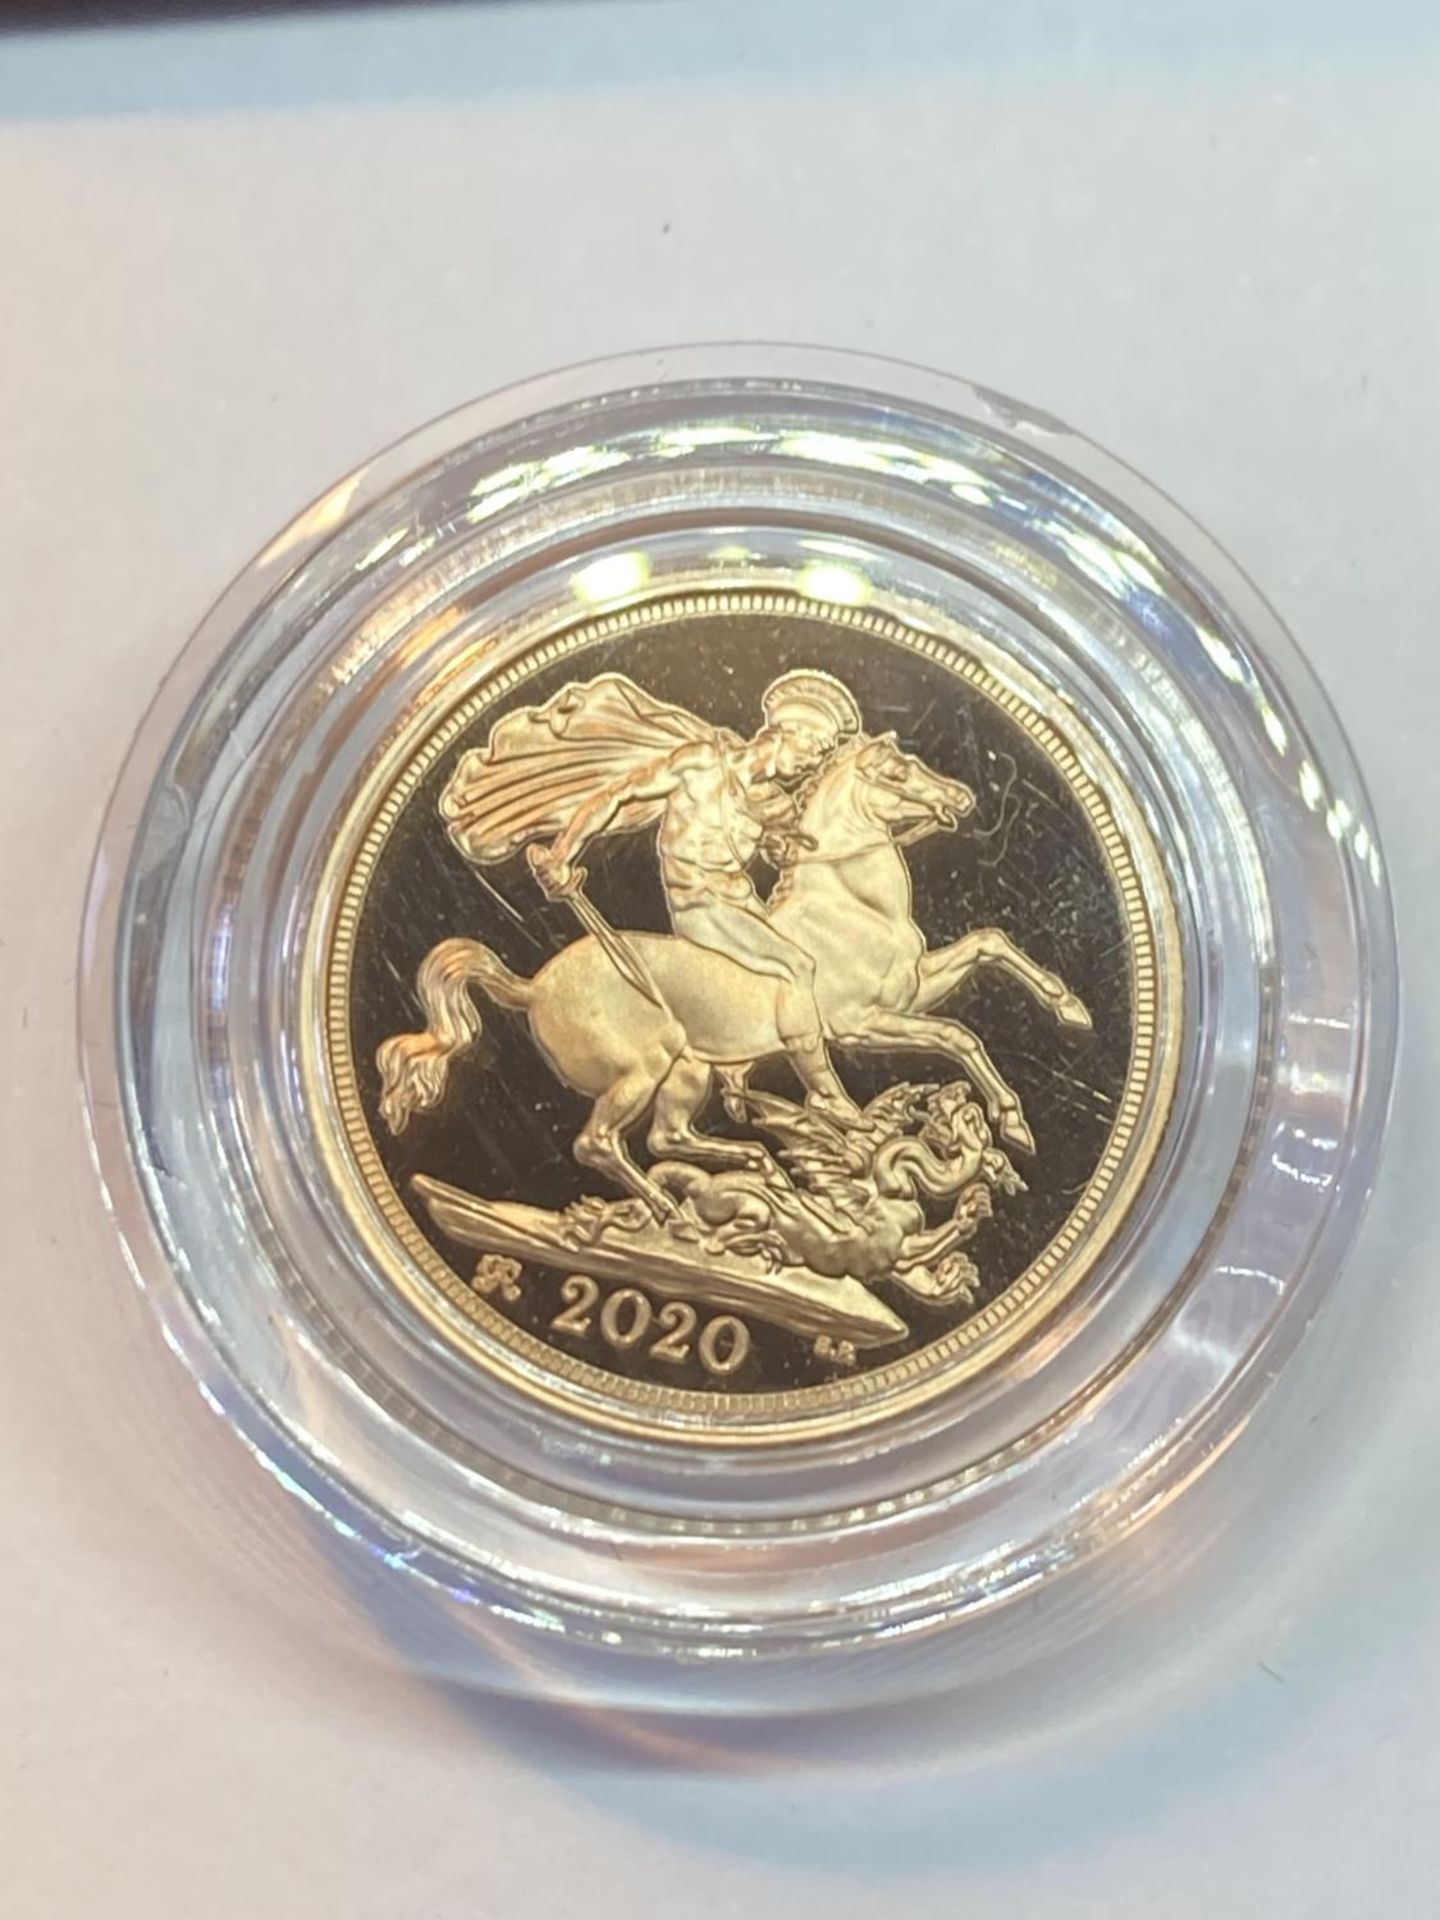 A 2020 THE SOVEREIGN GOLD PROOF LIMITED EDITION NUMBER 387 OF 7,995 IN A WOODEN BOXED CASE - Image 2 of 5